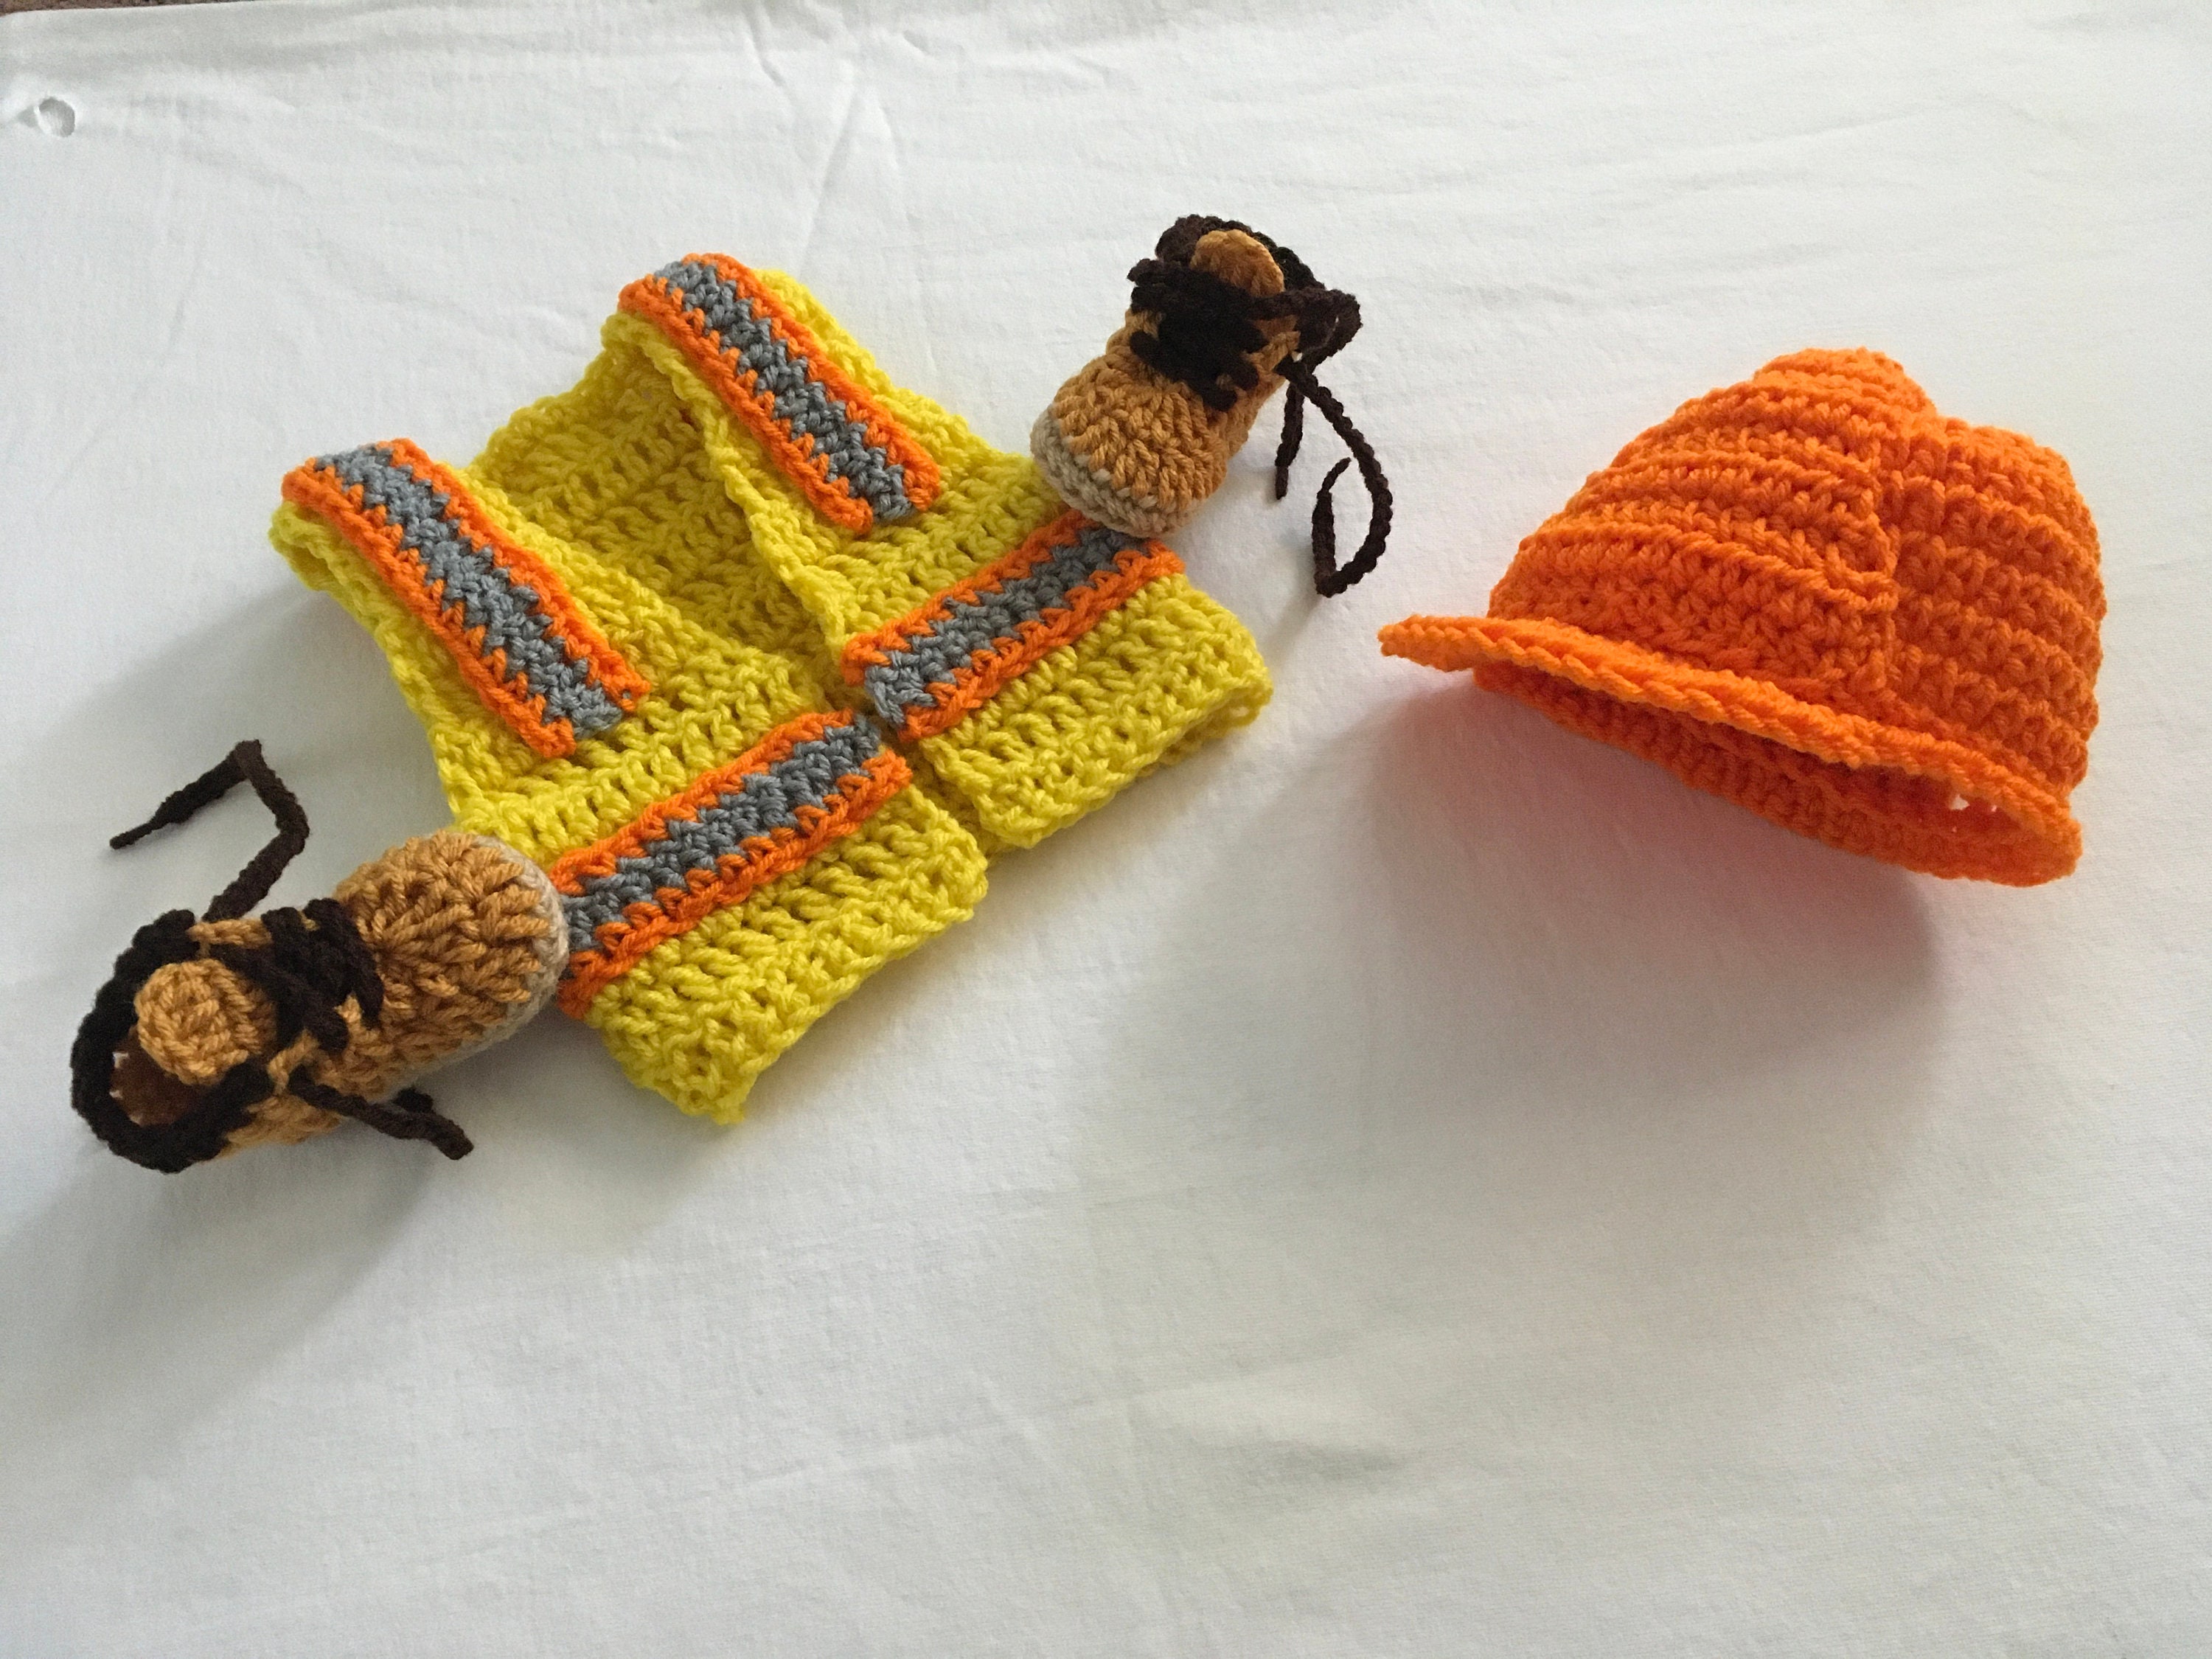 Crocheted Toys: Construction & Safety